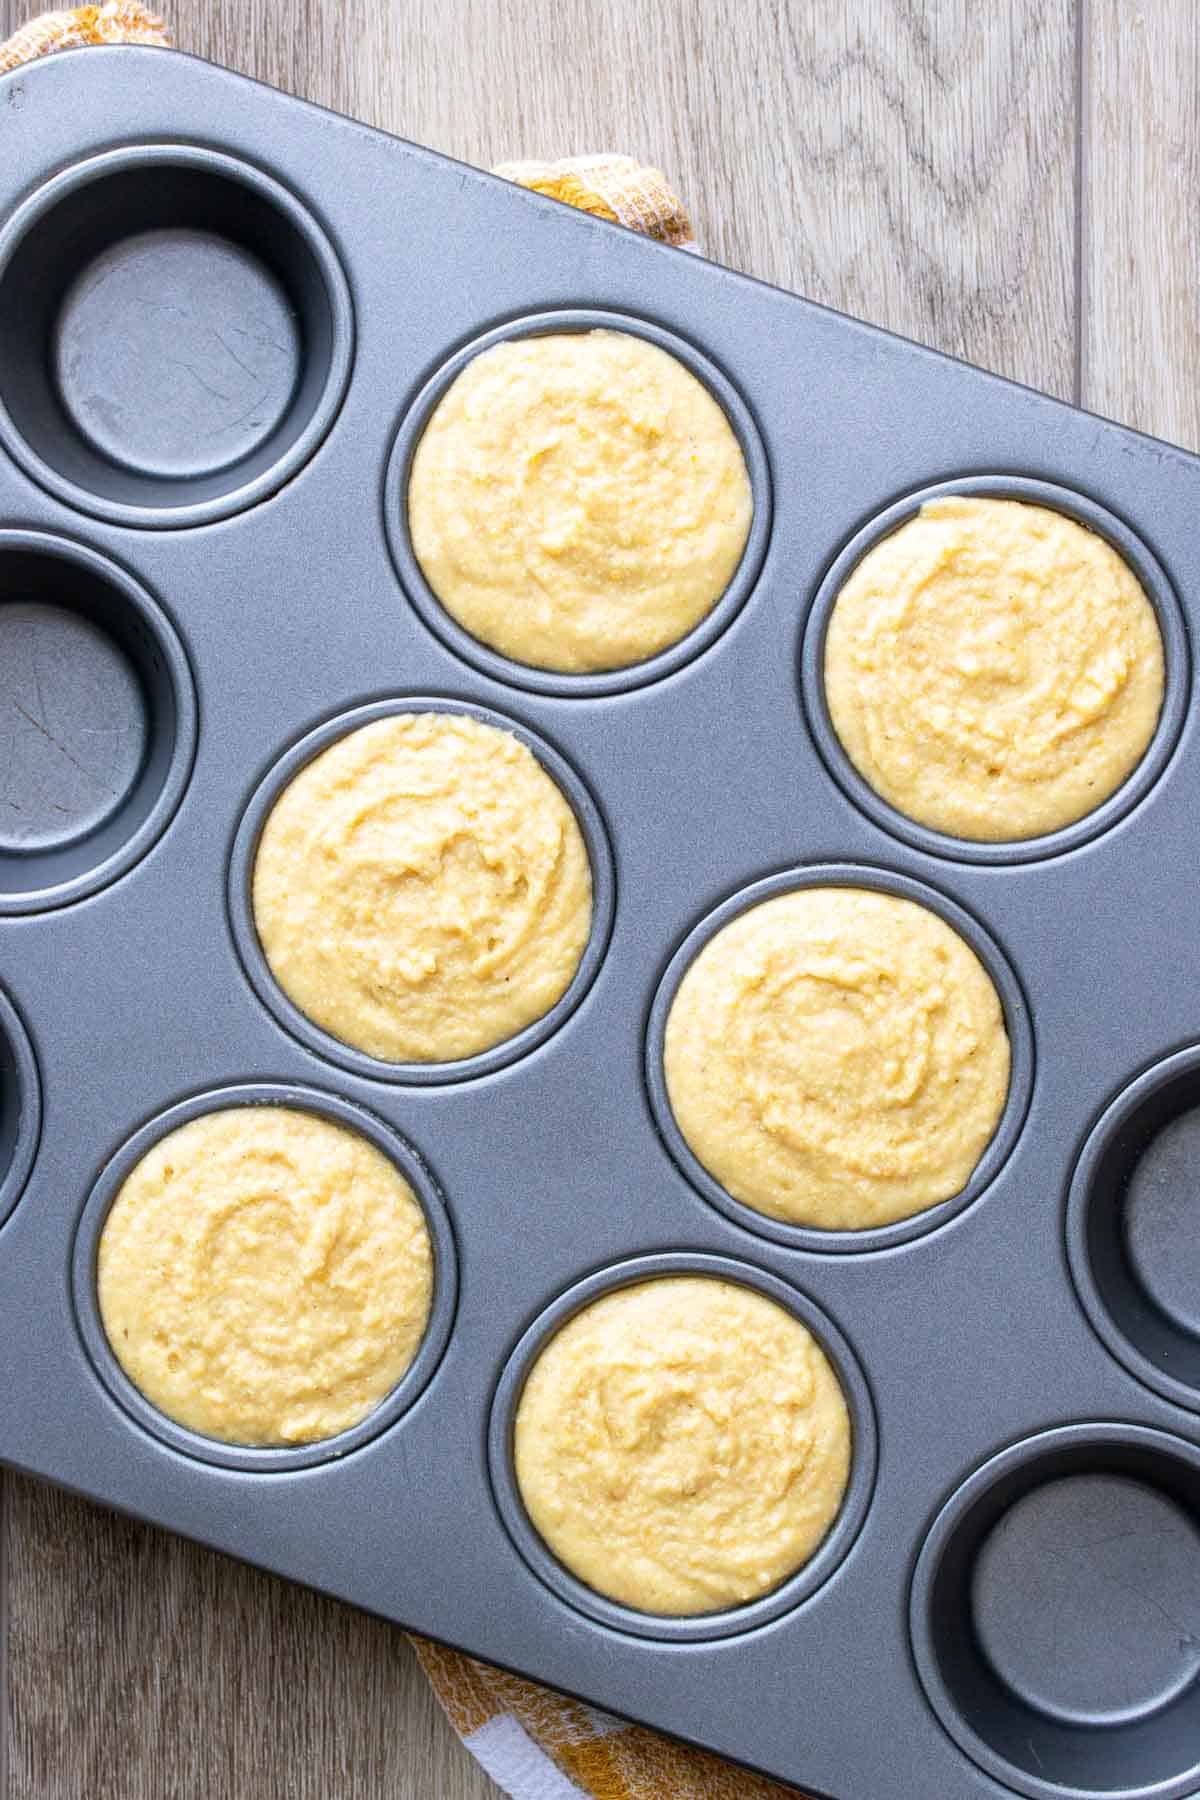 Muffin tin on a wooden surface filled with a yellow batter